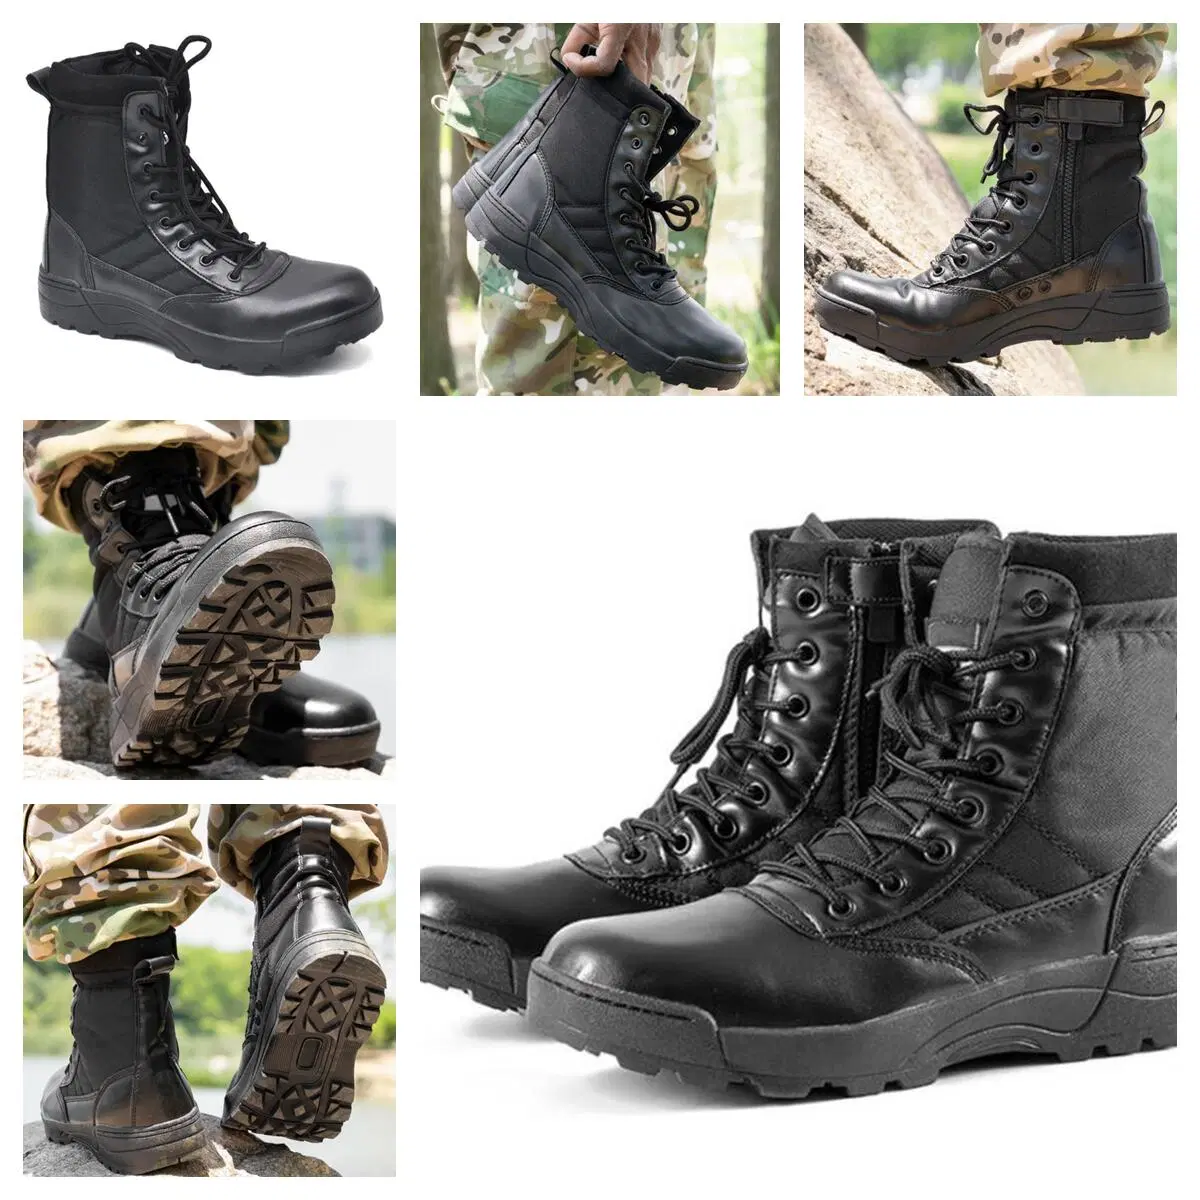 Kango Outdoor Military Army Tactical Combat Training Boots Men Durable Waterproof Police Desert Camouflage Leather Jungle Anti Slip Safety Shoes Hiking Hunting